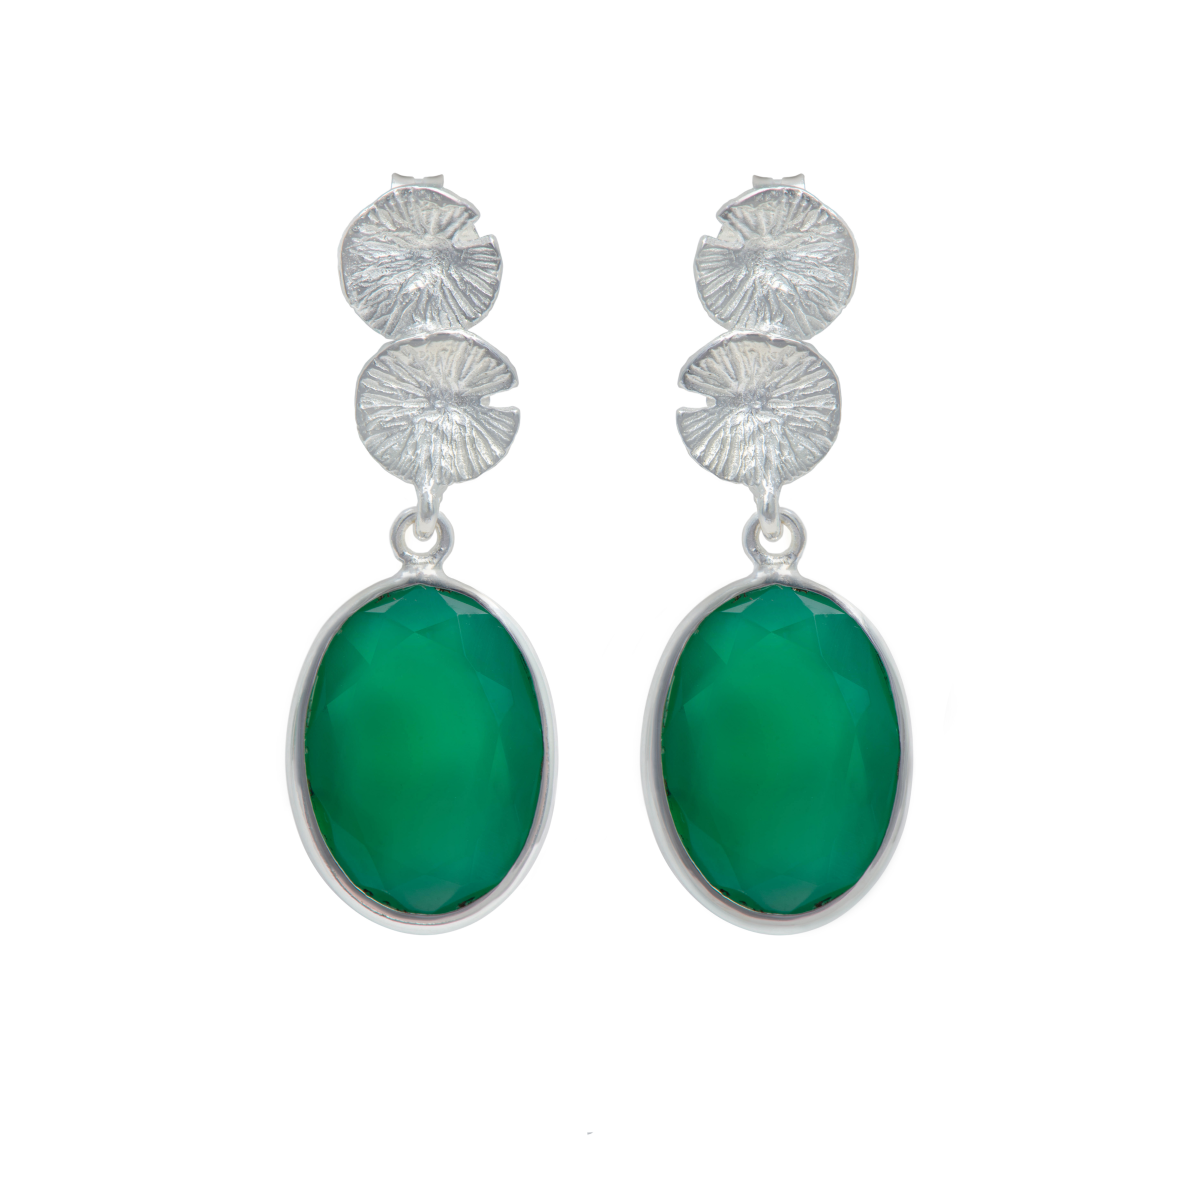 Lily Pad Earrings in Sterling Silver with a Green Onyx Gemstone Drop